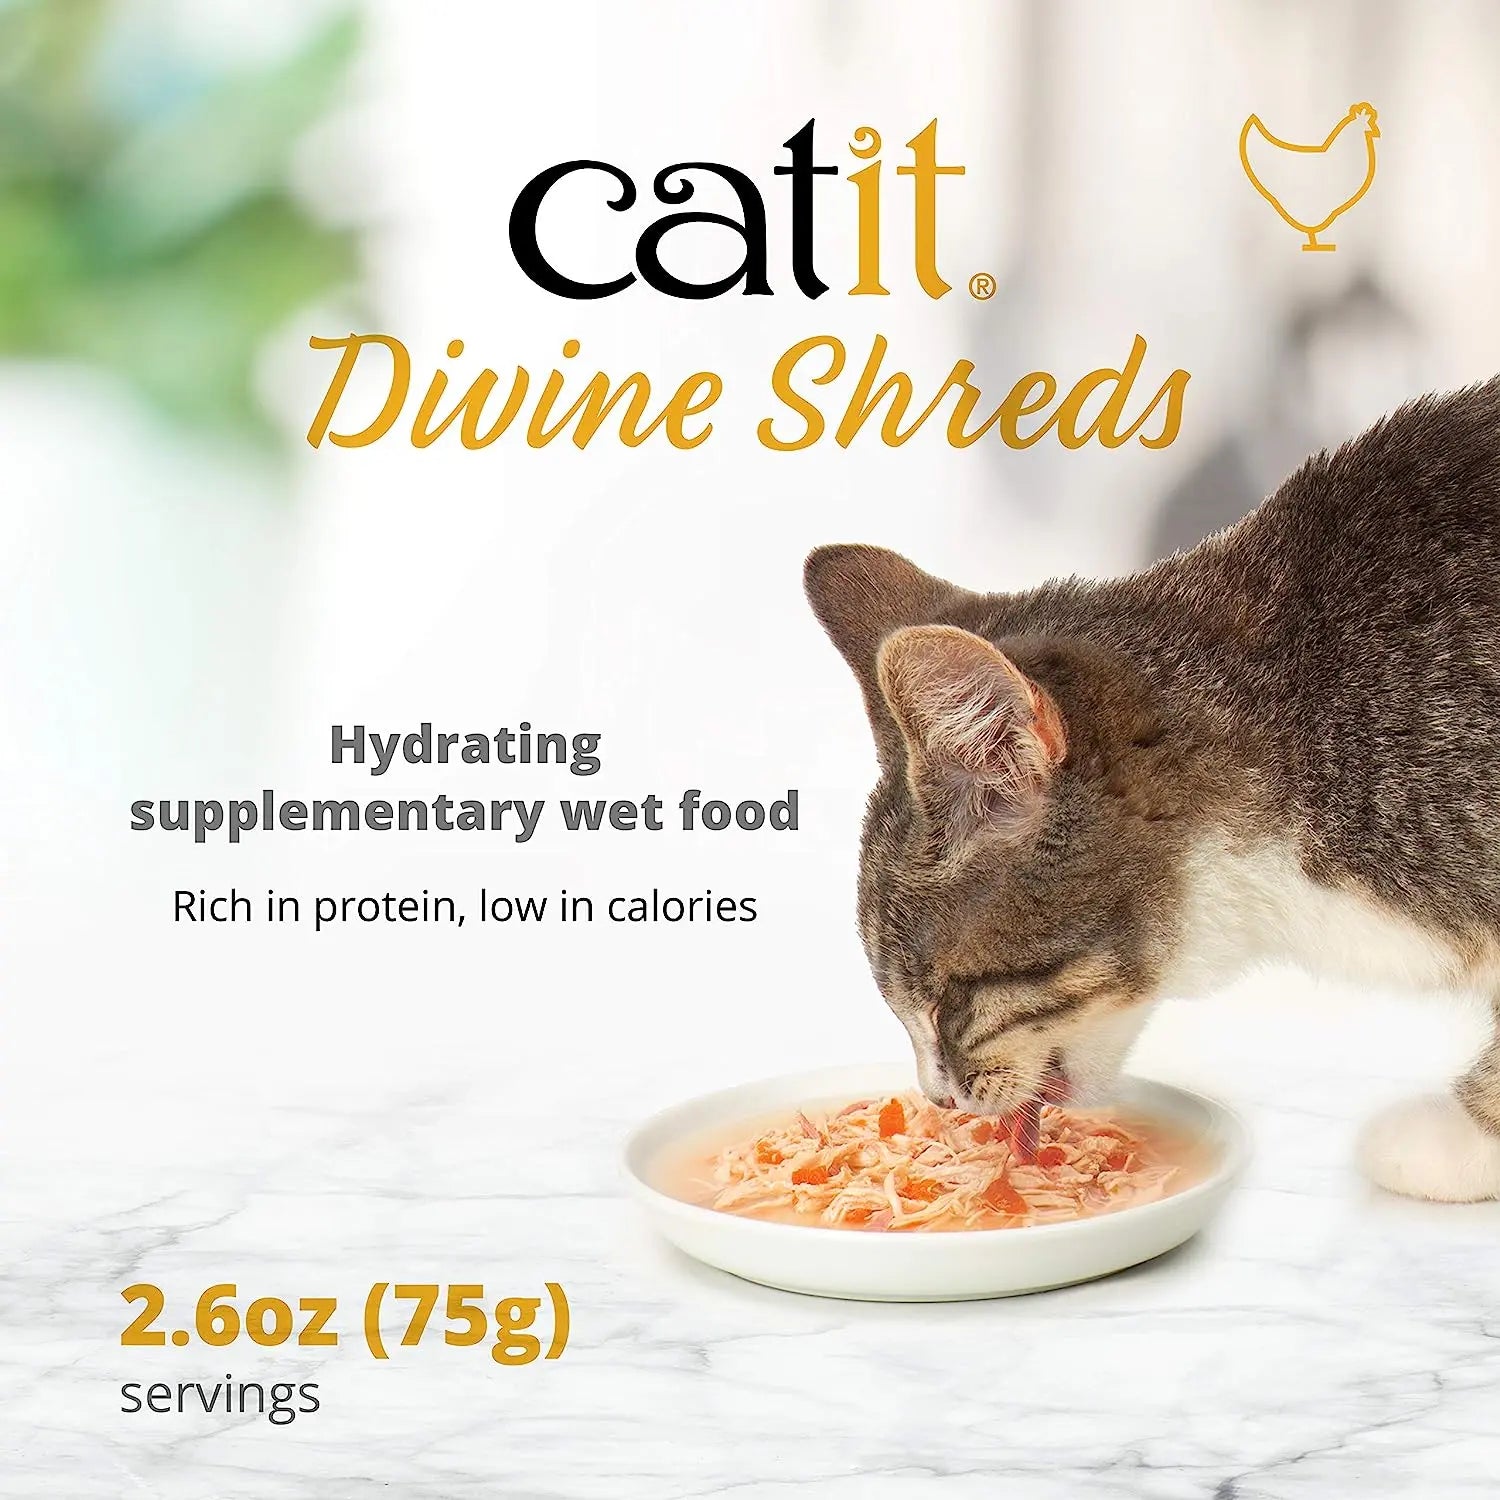 Catit Divine Shreds Chicken with Liver and Broccoli CatIt